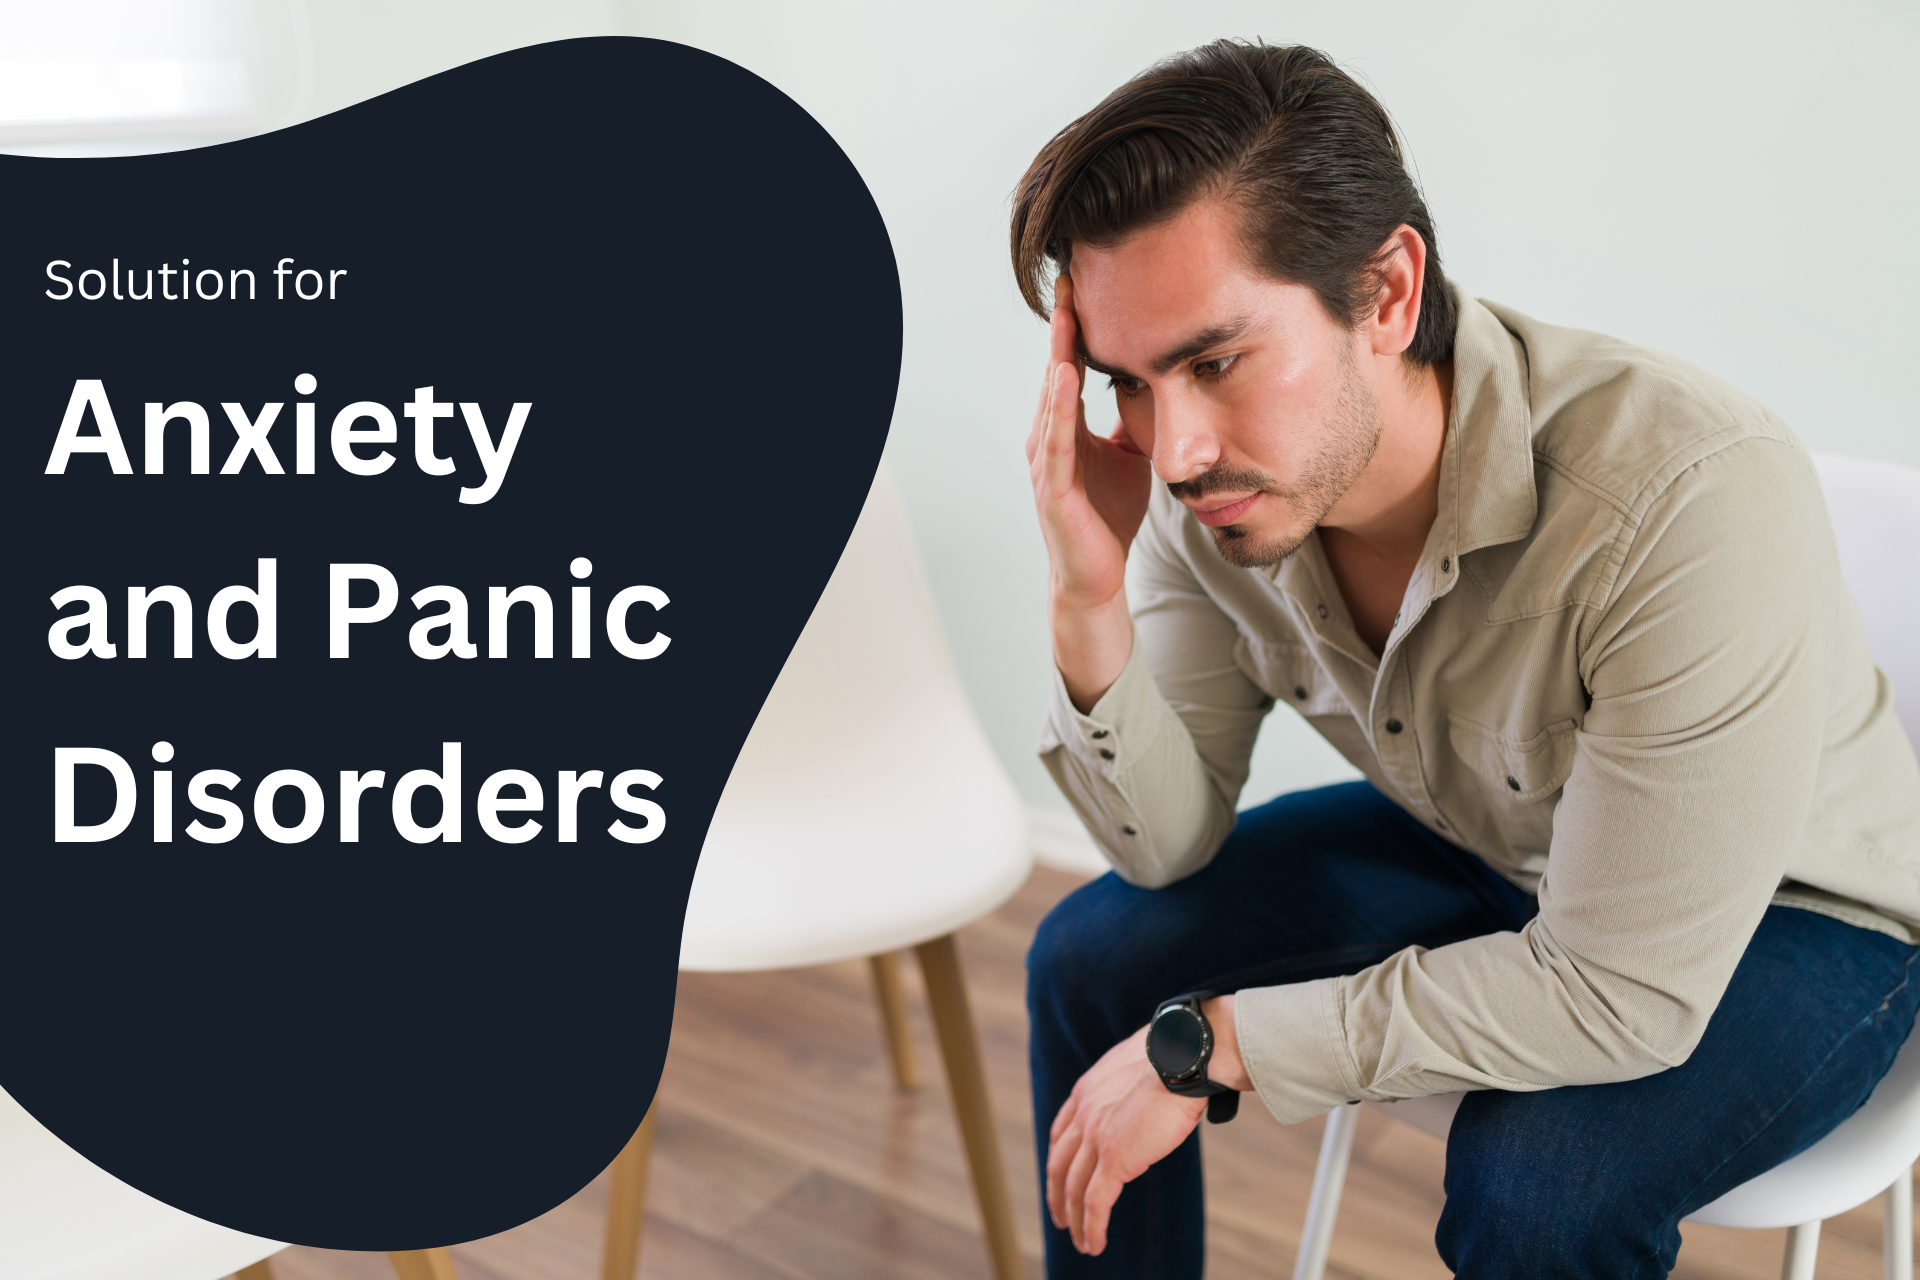 Anxiety and Panic Disorders: Get the Solution with Xanax 2mg